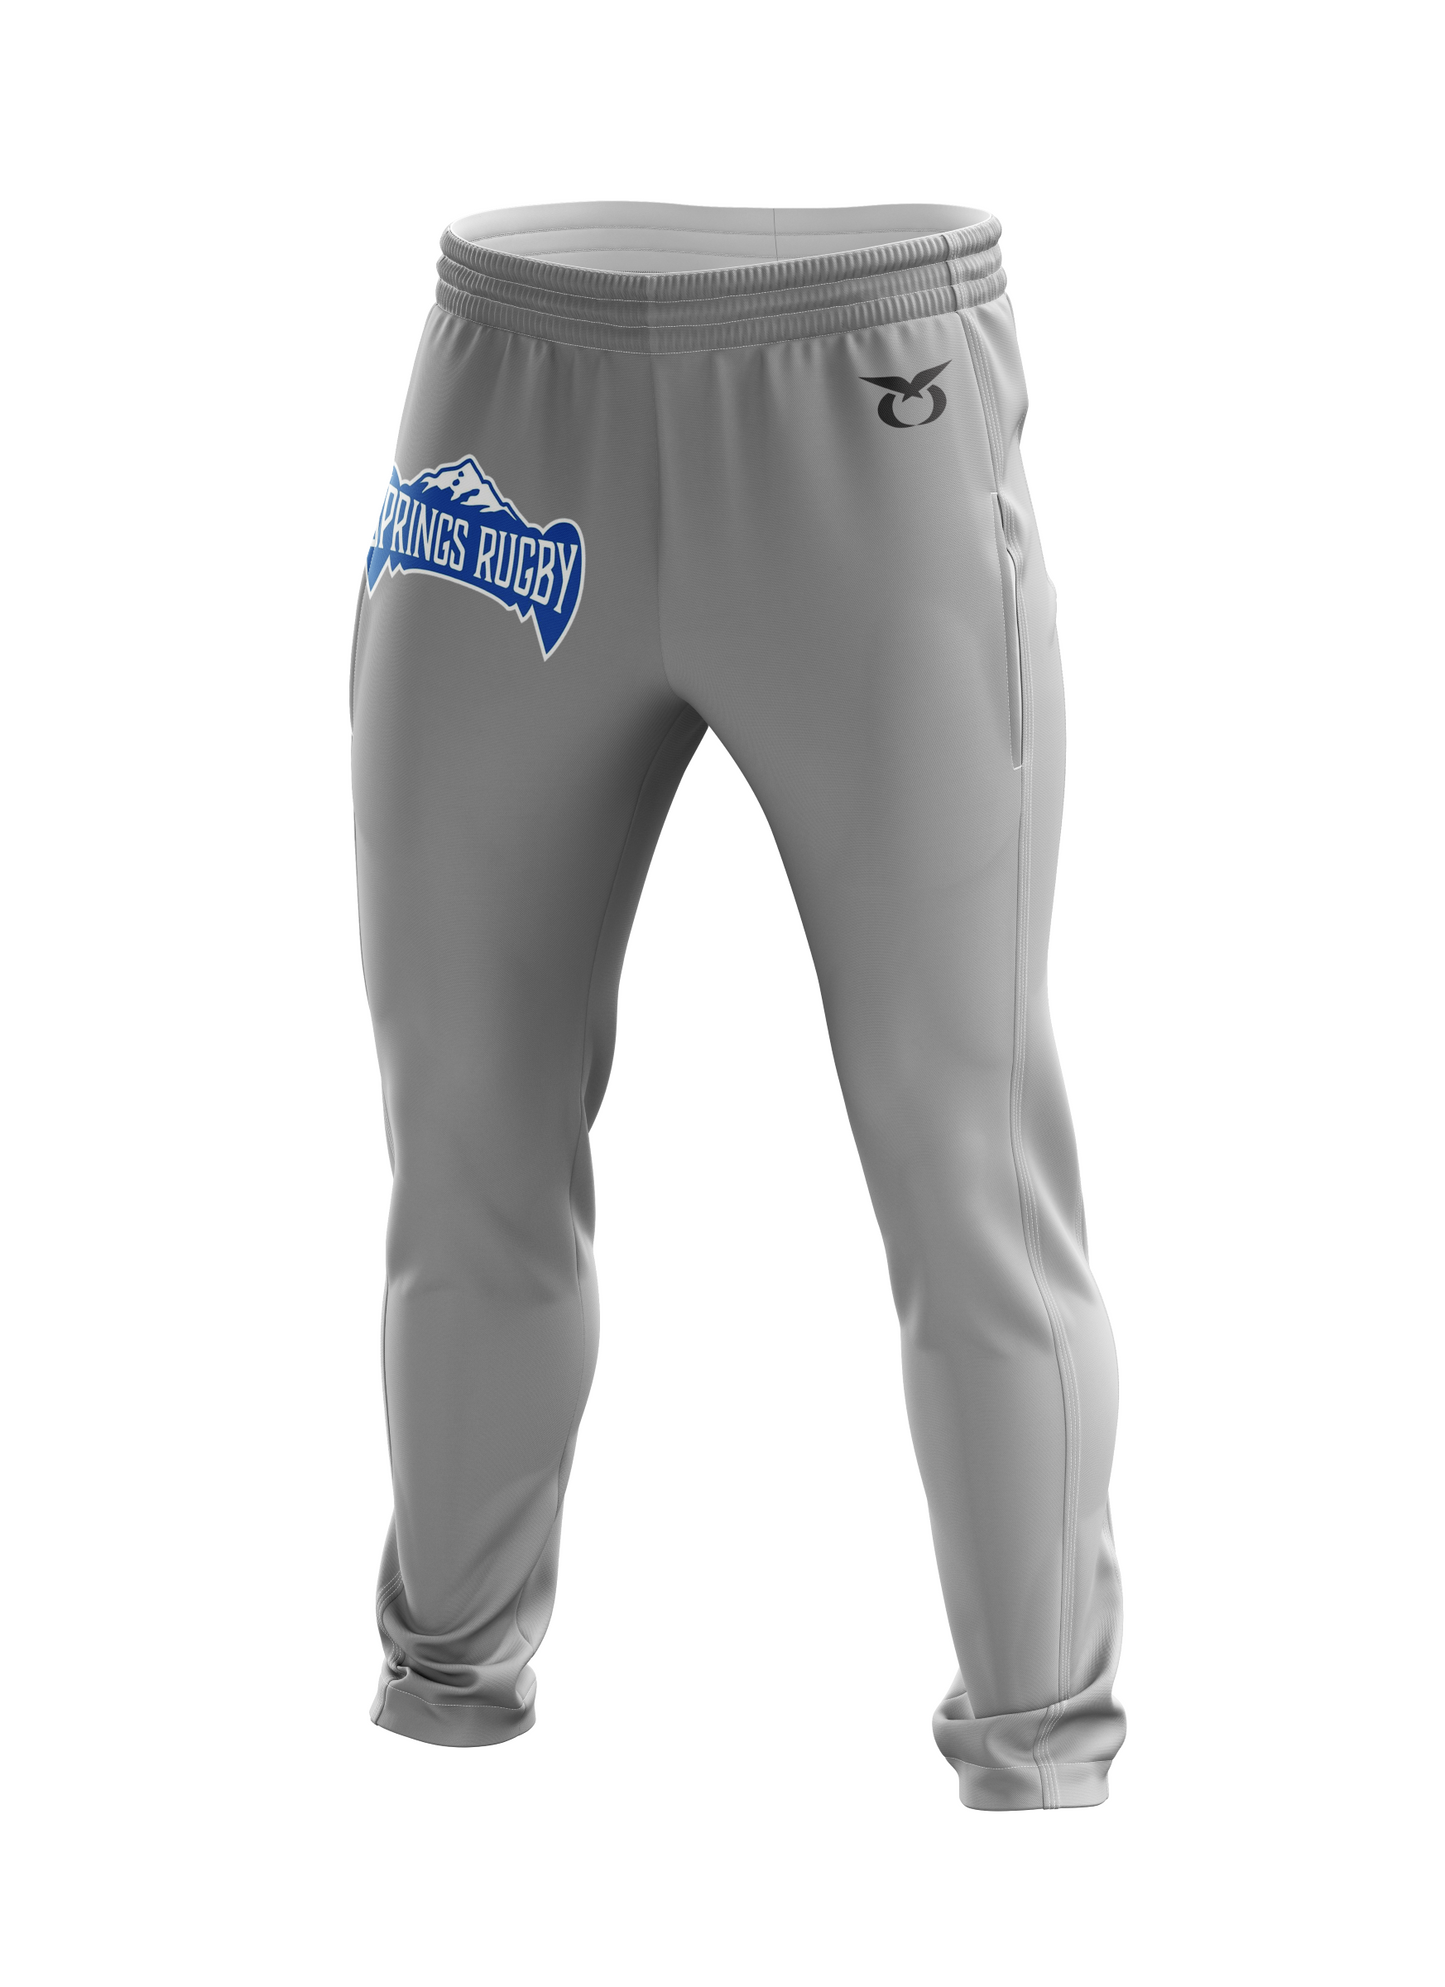 Springs Rugby Joggers - Pre-Order